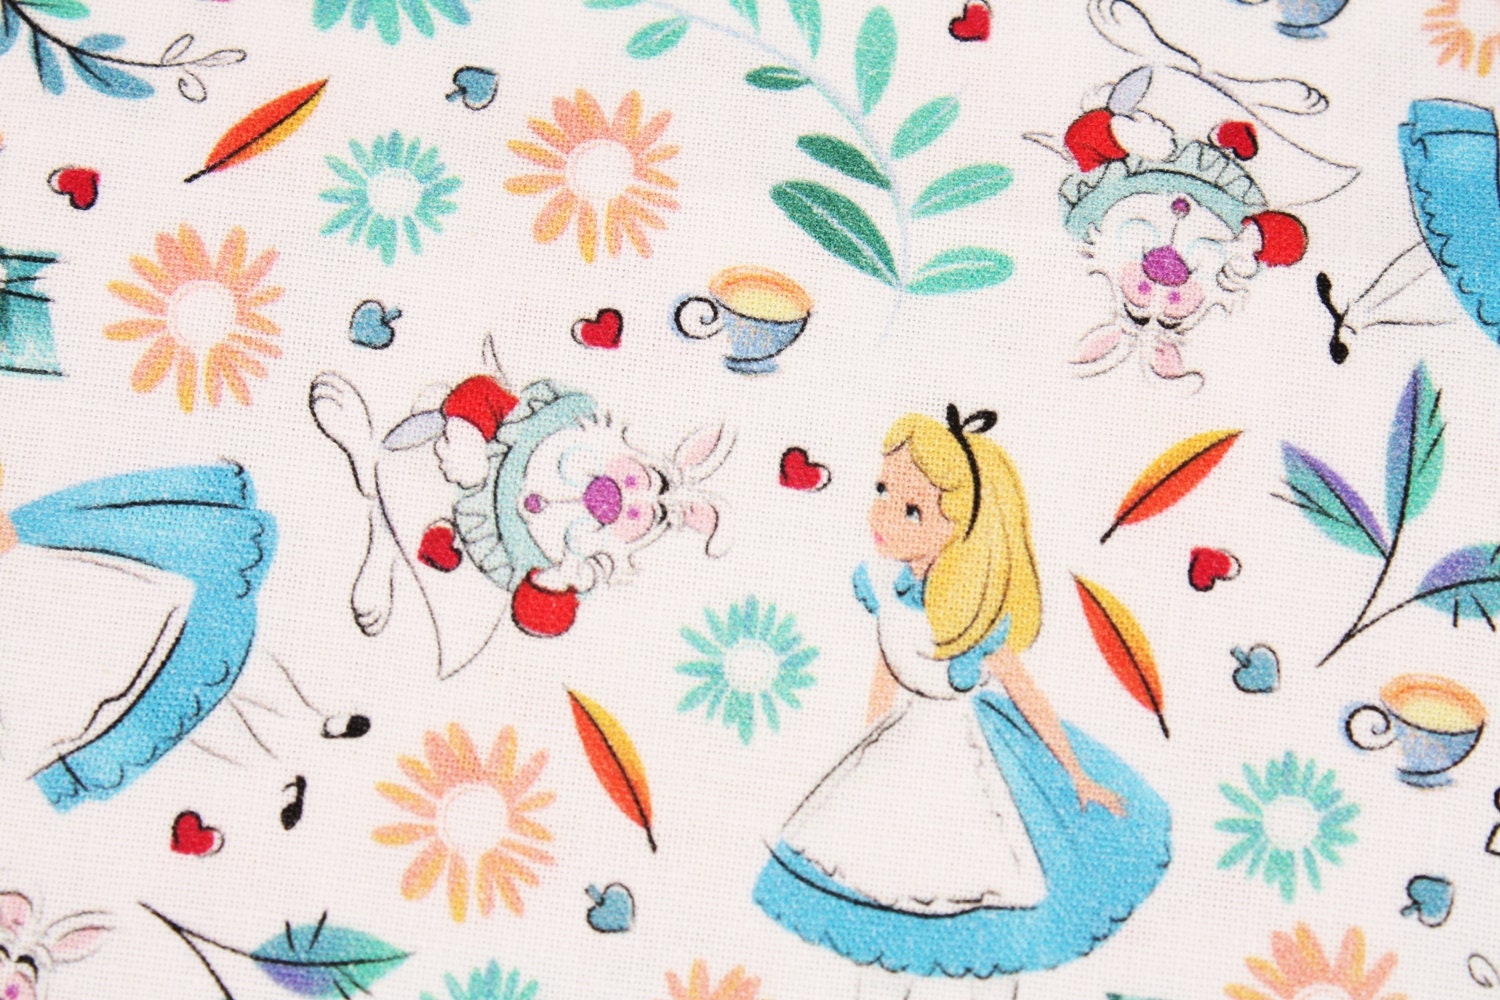 Alice Wonderland Mad Hatter Fabric Covered Button 1 & 1/2 inch FREE US SHIPPING 